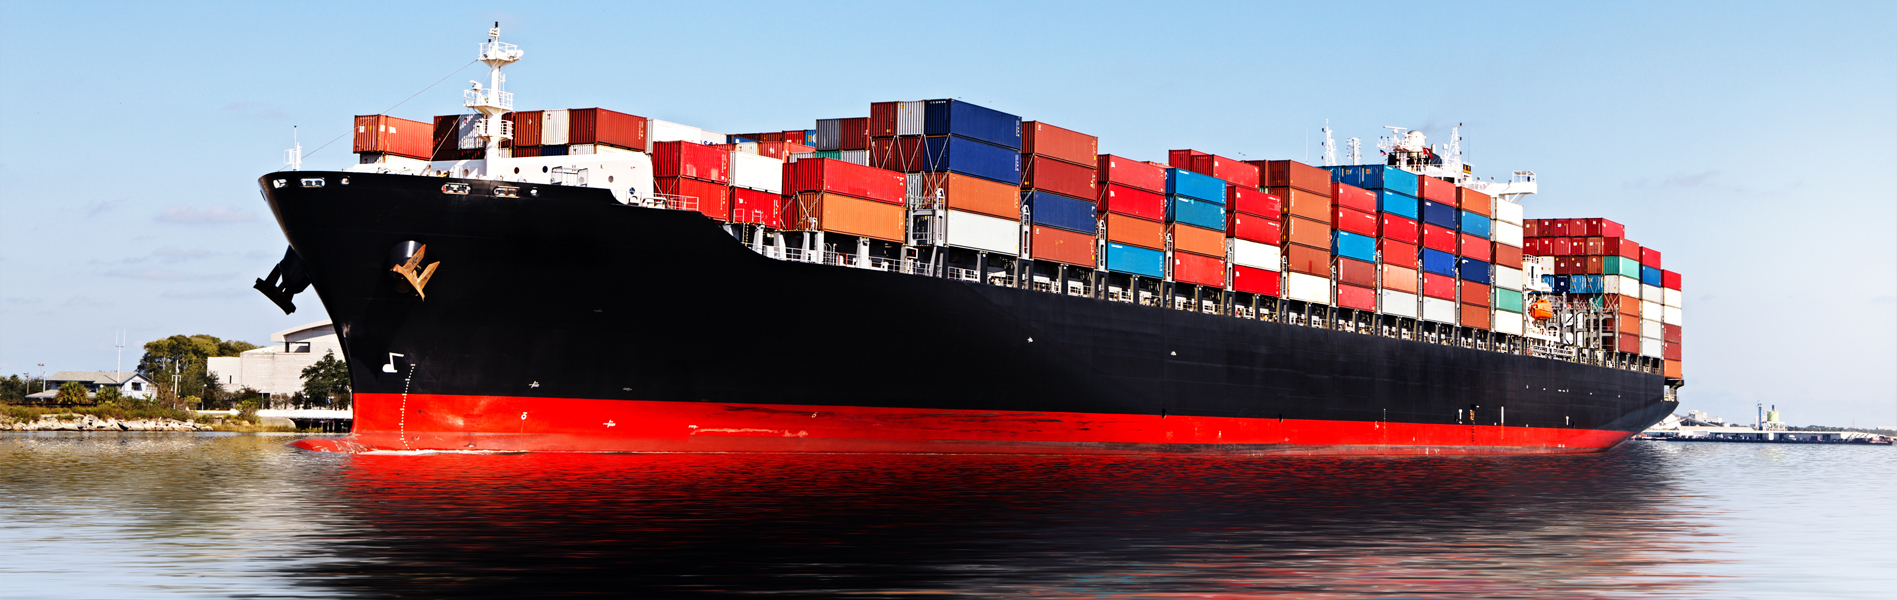 container ship wallpaper hd alternatiing